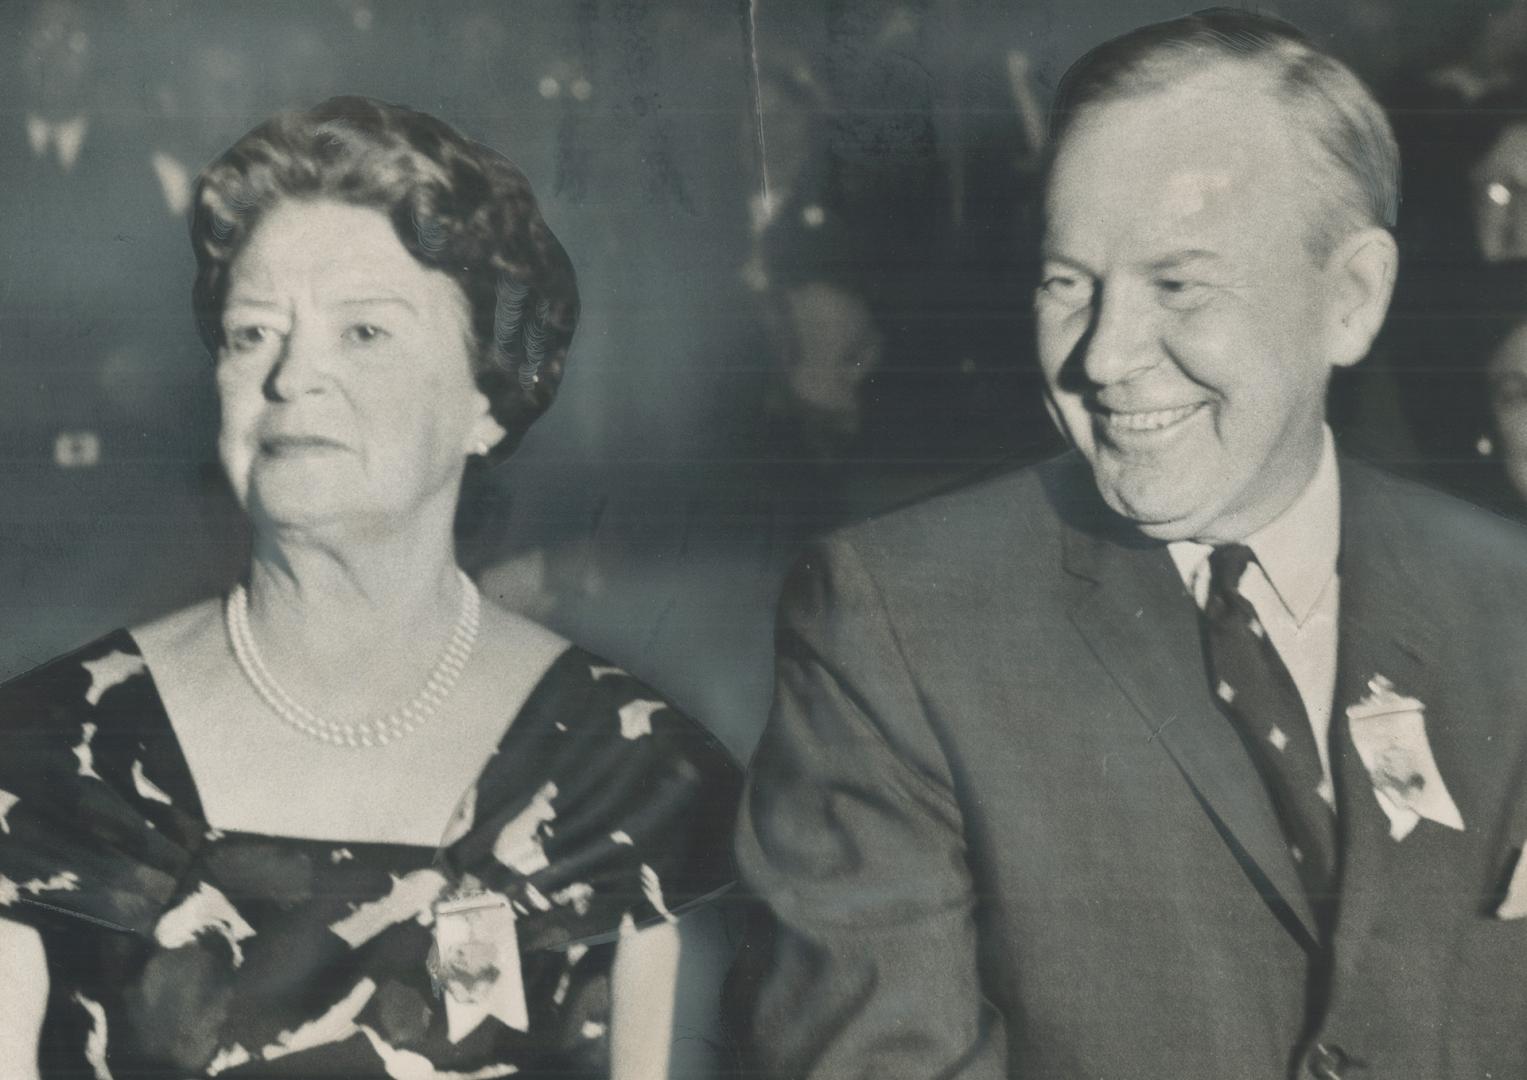 Pearsons get the point. Prime Minister and Mrs. Lester Pearson (above) enjoy the humor of star Bob Goulet at last night's CNE grandstand show, where t(...)